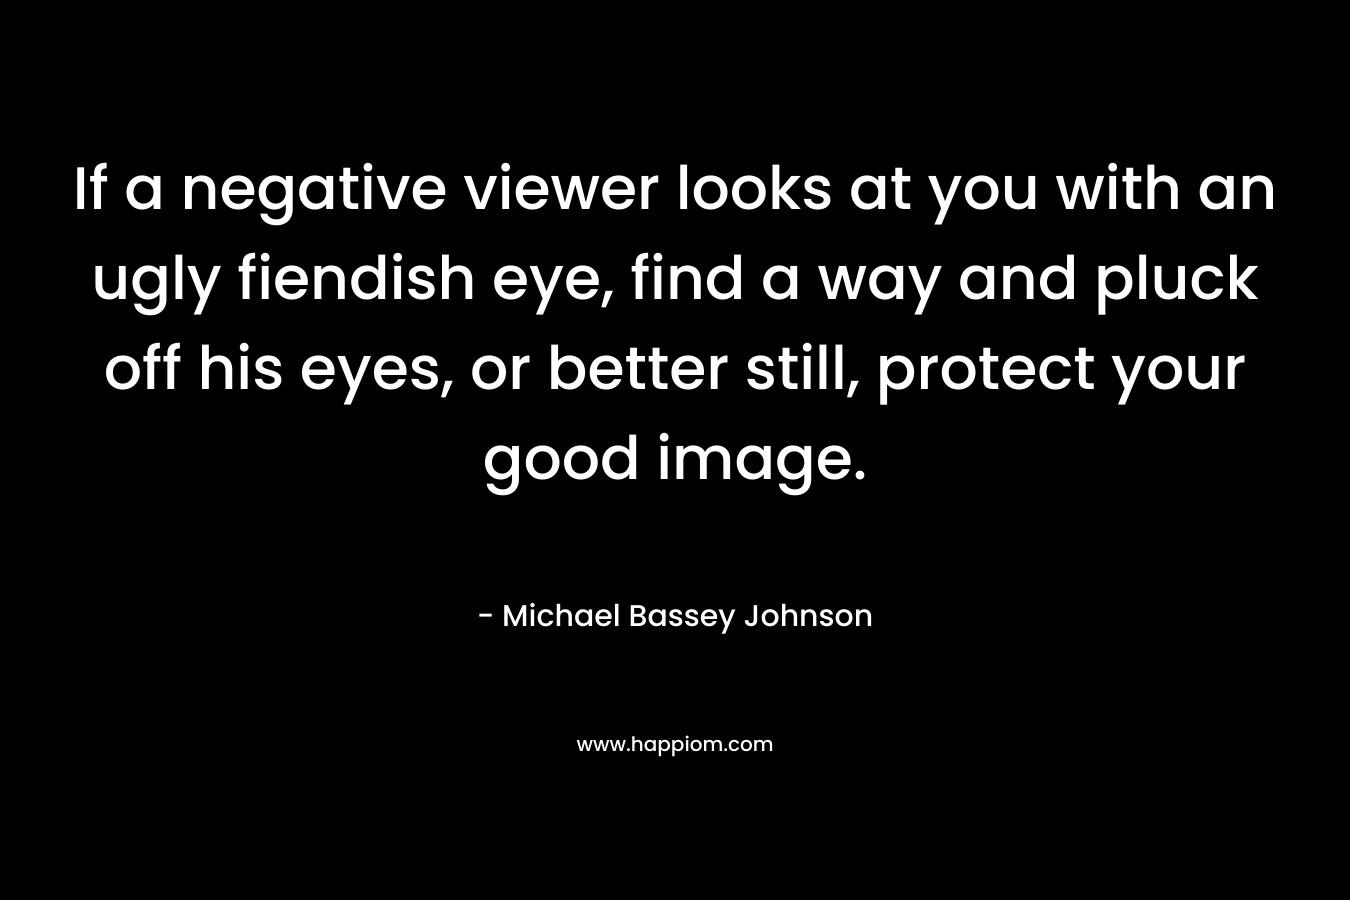 If a negative viewer looks at you with an ugly fiendish eye, find a way and pluck off his eyes, or better still, protect your good image. – Michael Bassey Johnson